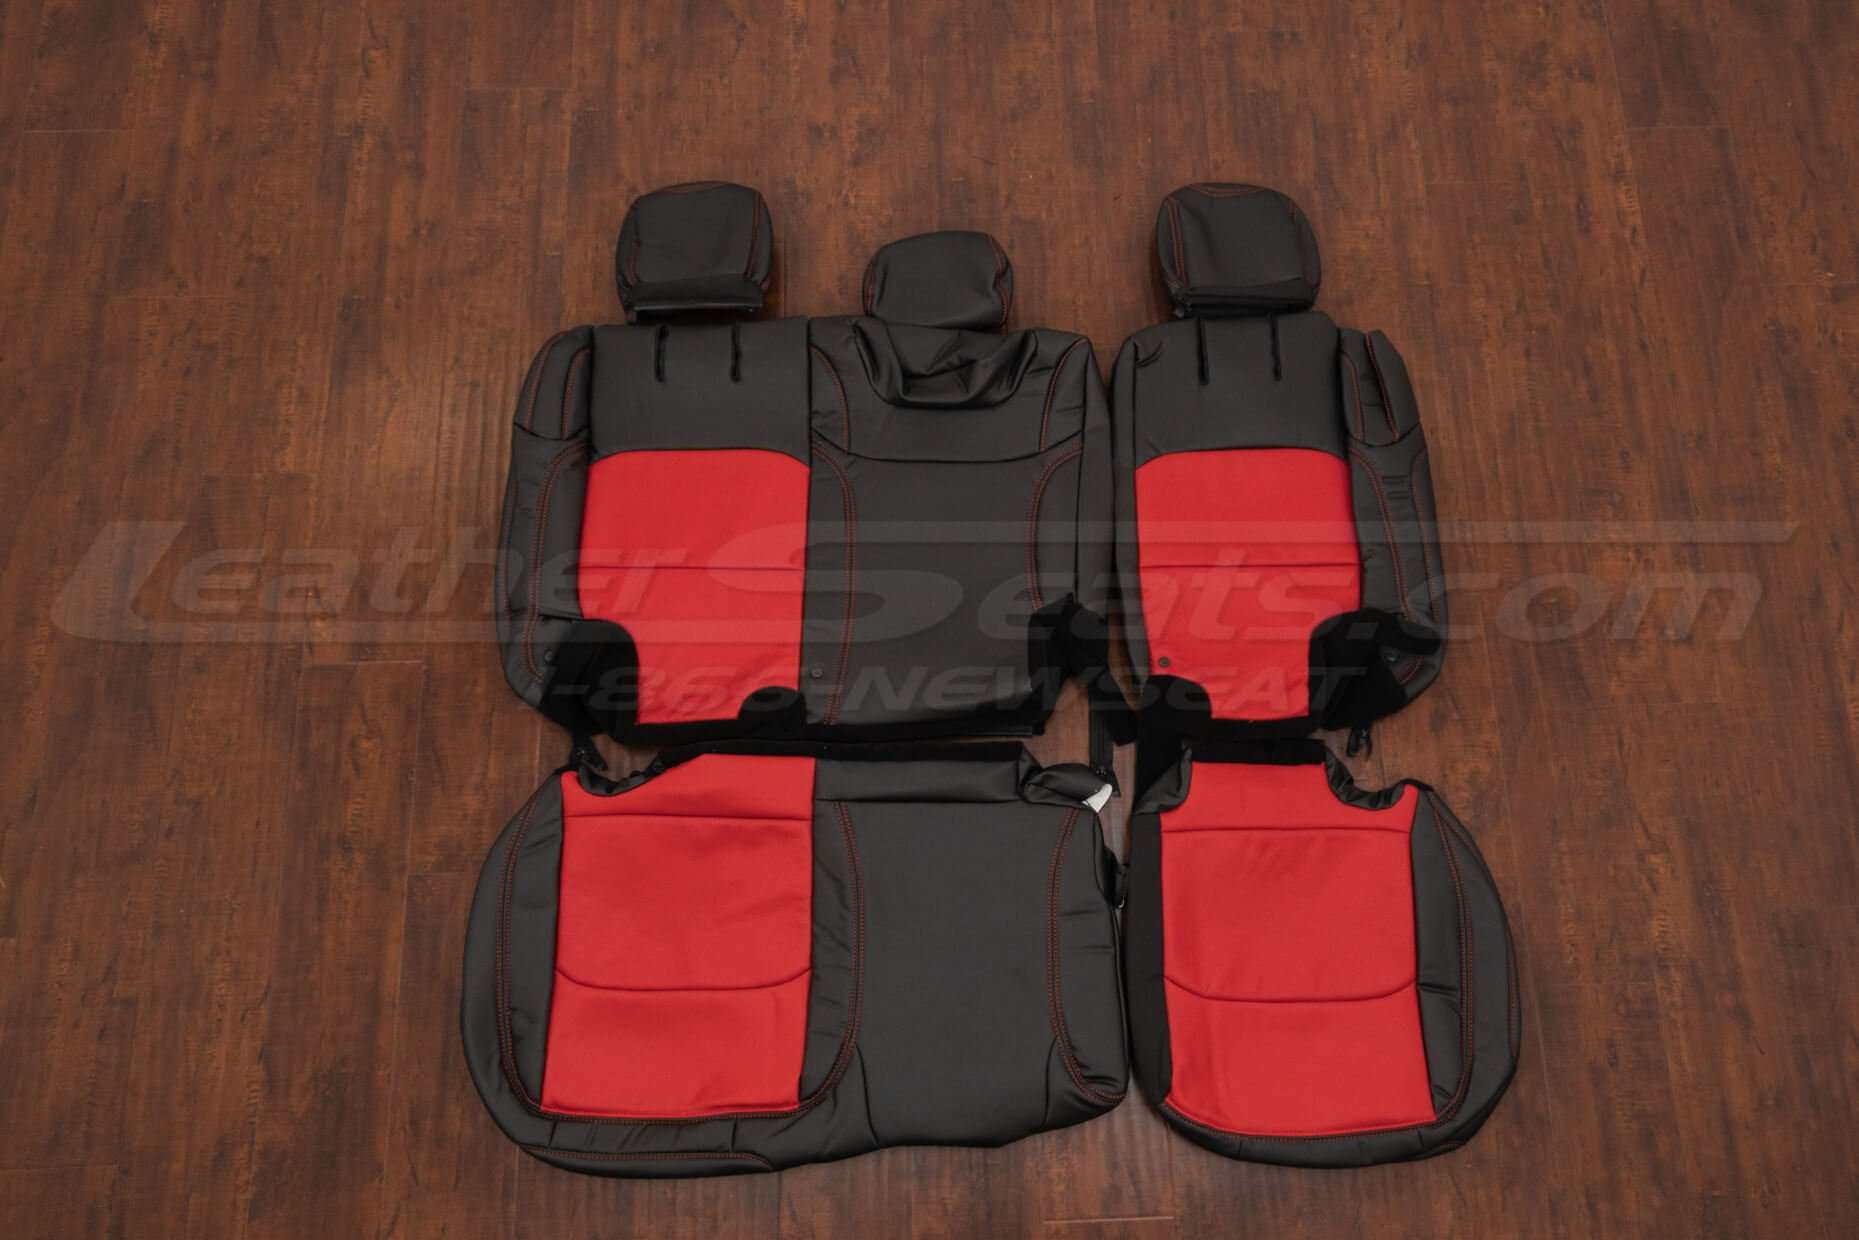 Jeep Wrangler Leather Kit - Black & Bright Red - Rear seat upholstery